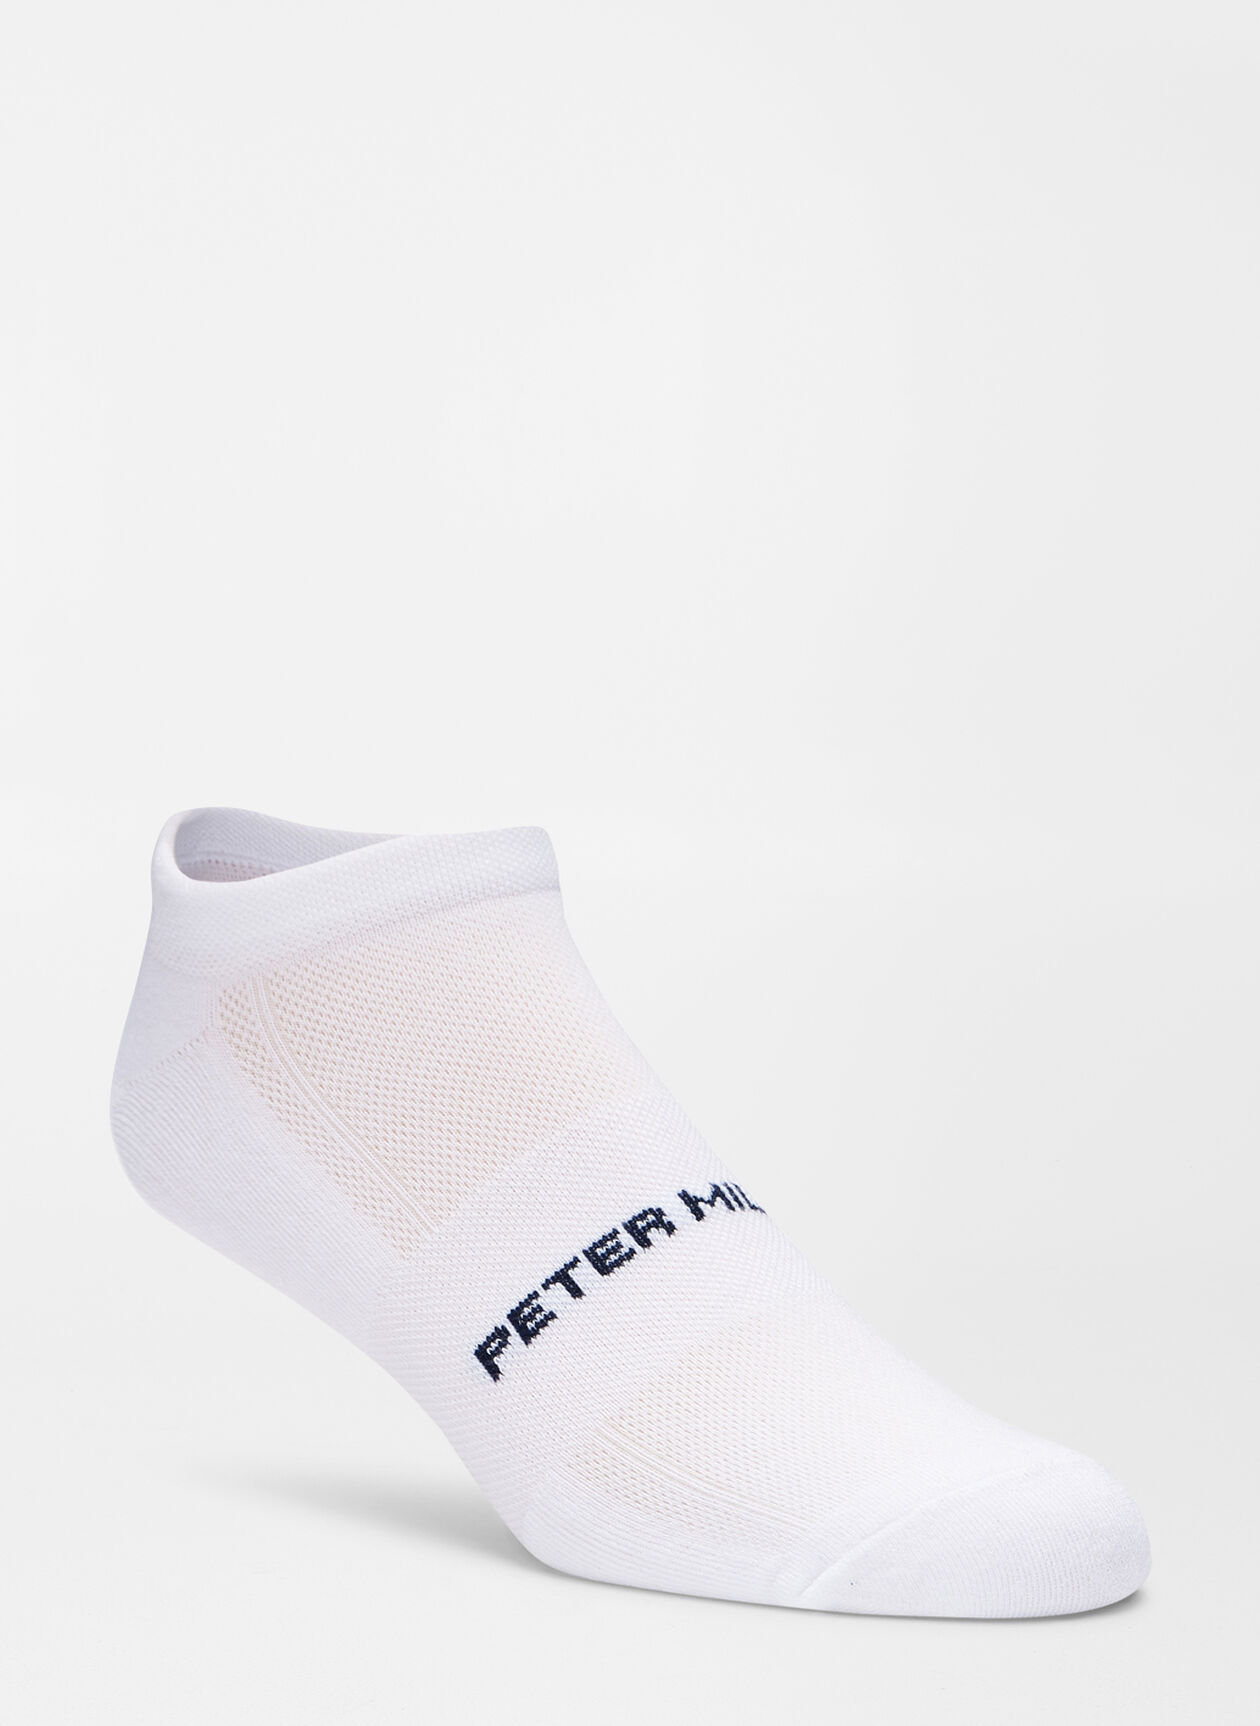 Peter Milar Two-Pack Performance Sock | ME0EF02-White | One Size | White